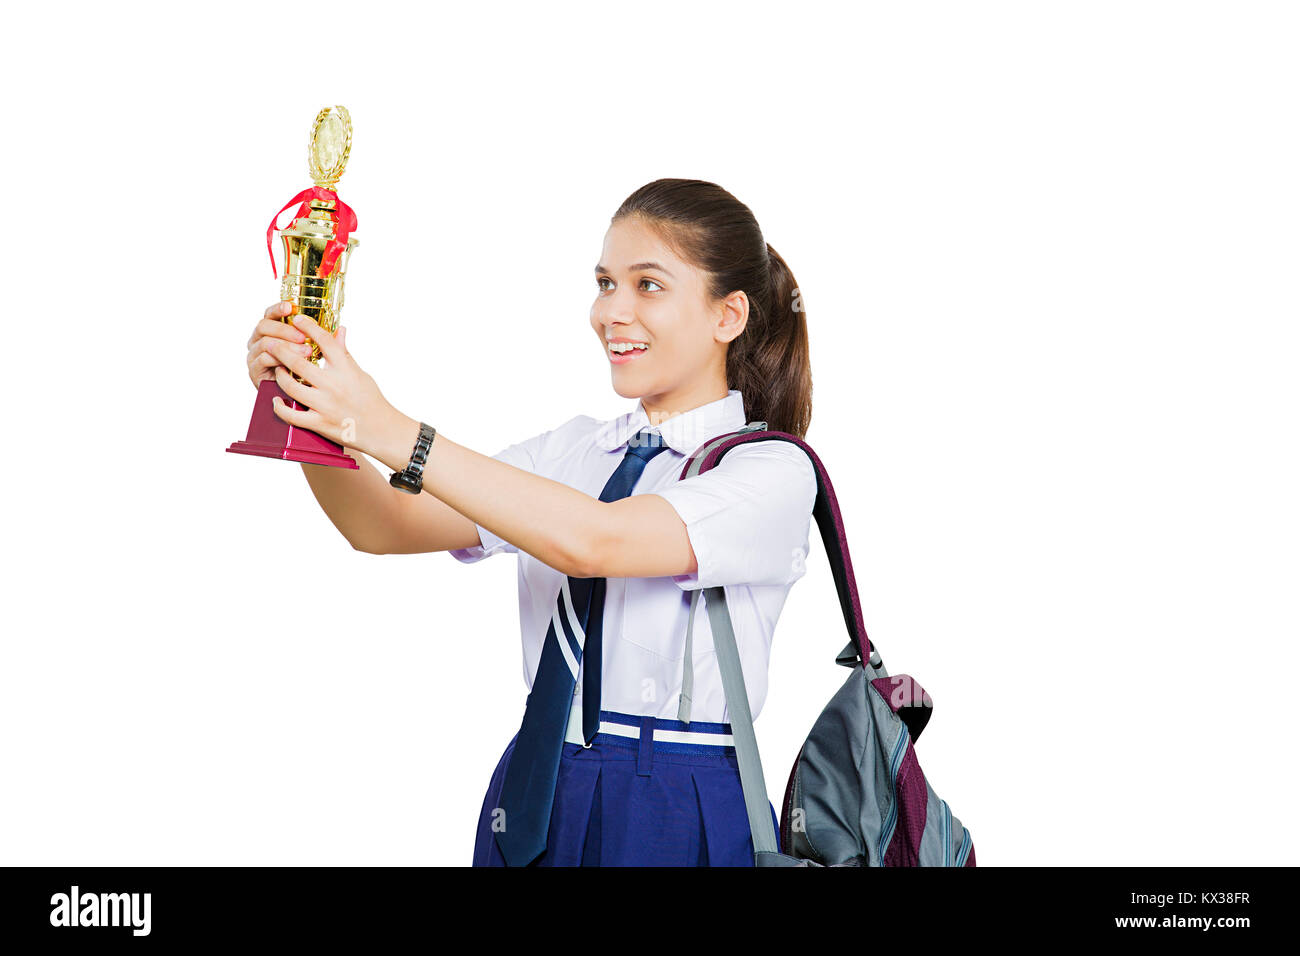 1 Indian Teenger Girl School Student Watching Trophy Victory Success Stock Photo